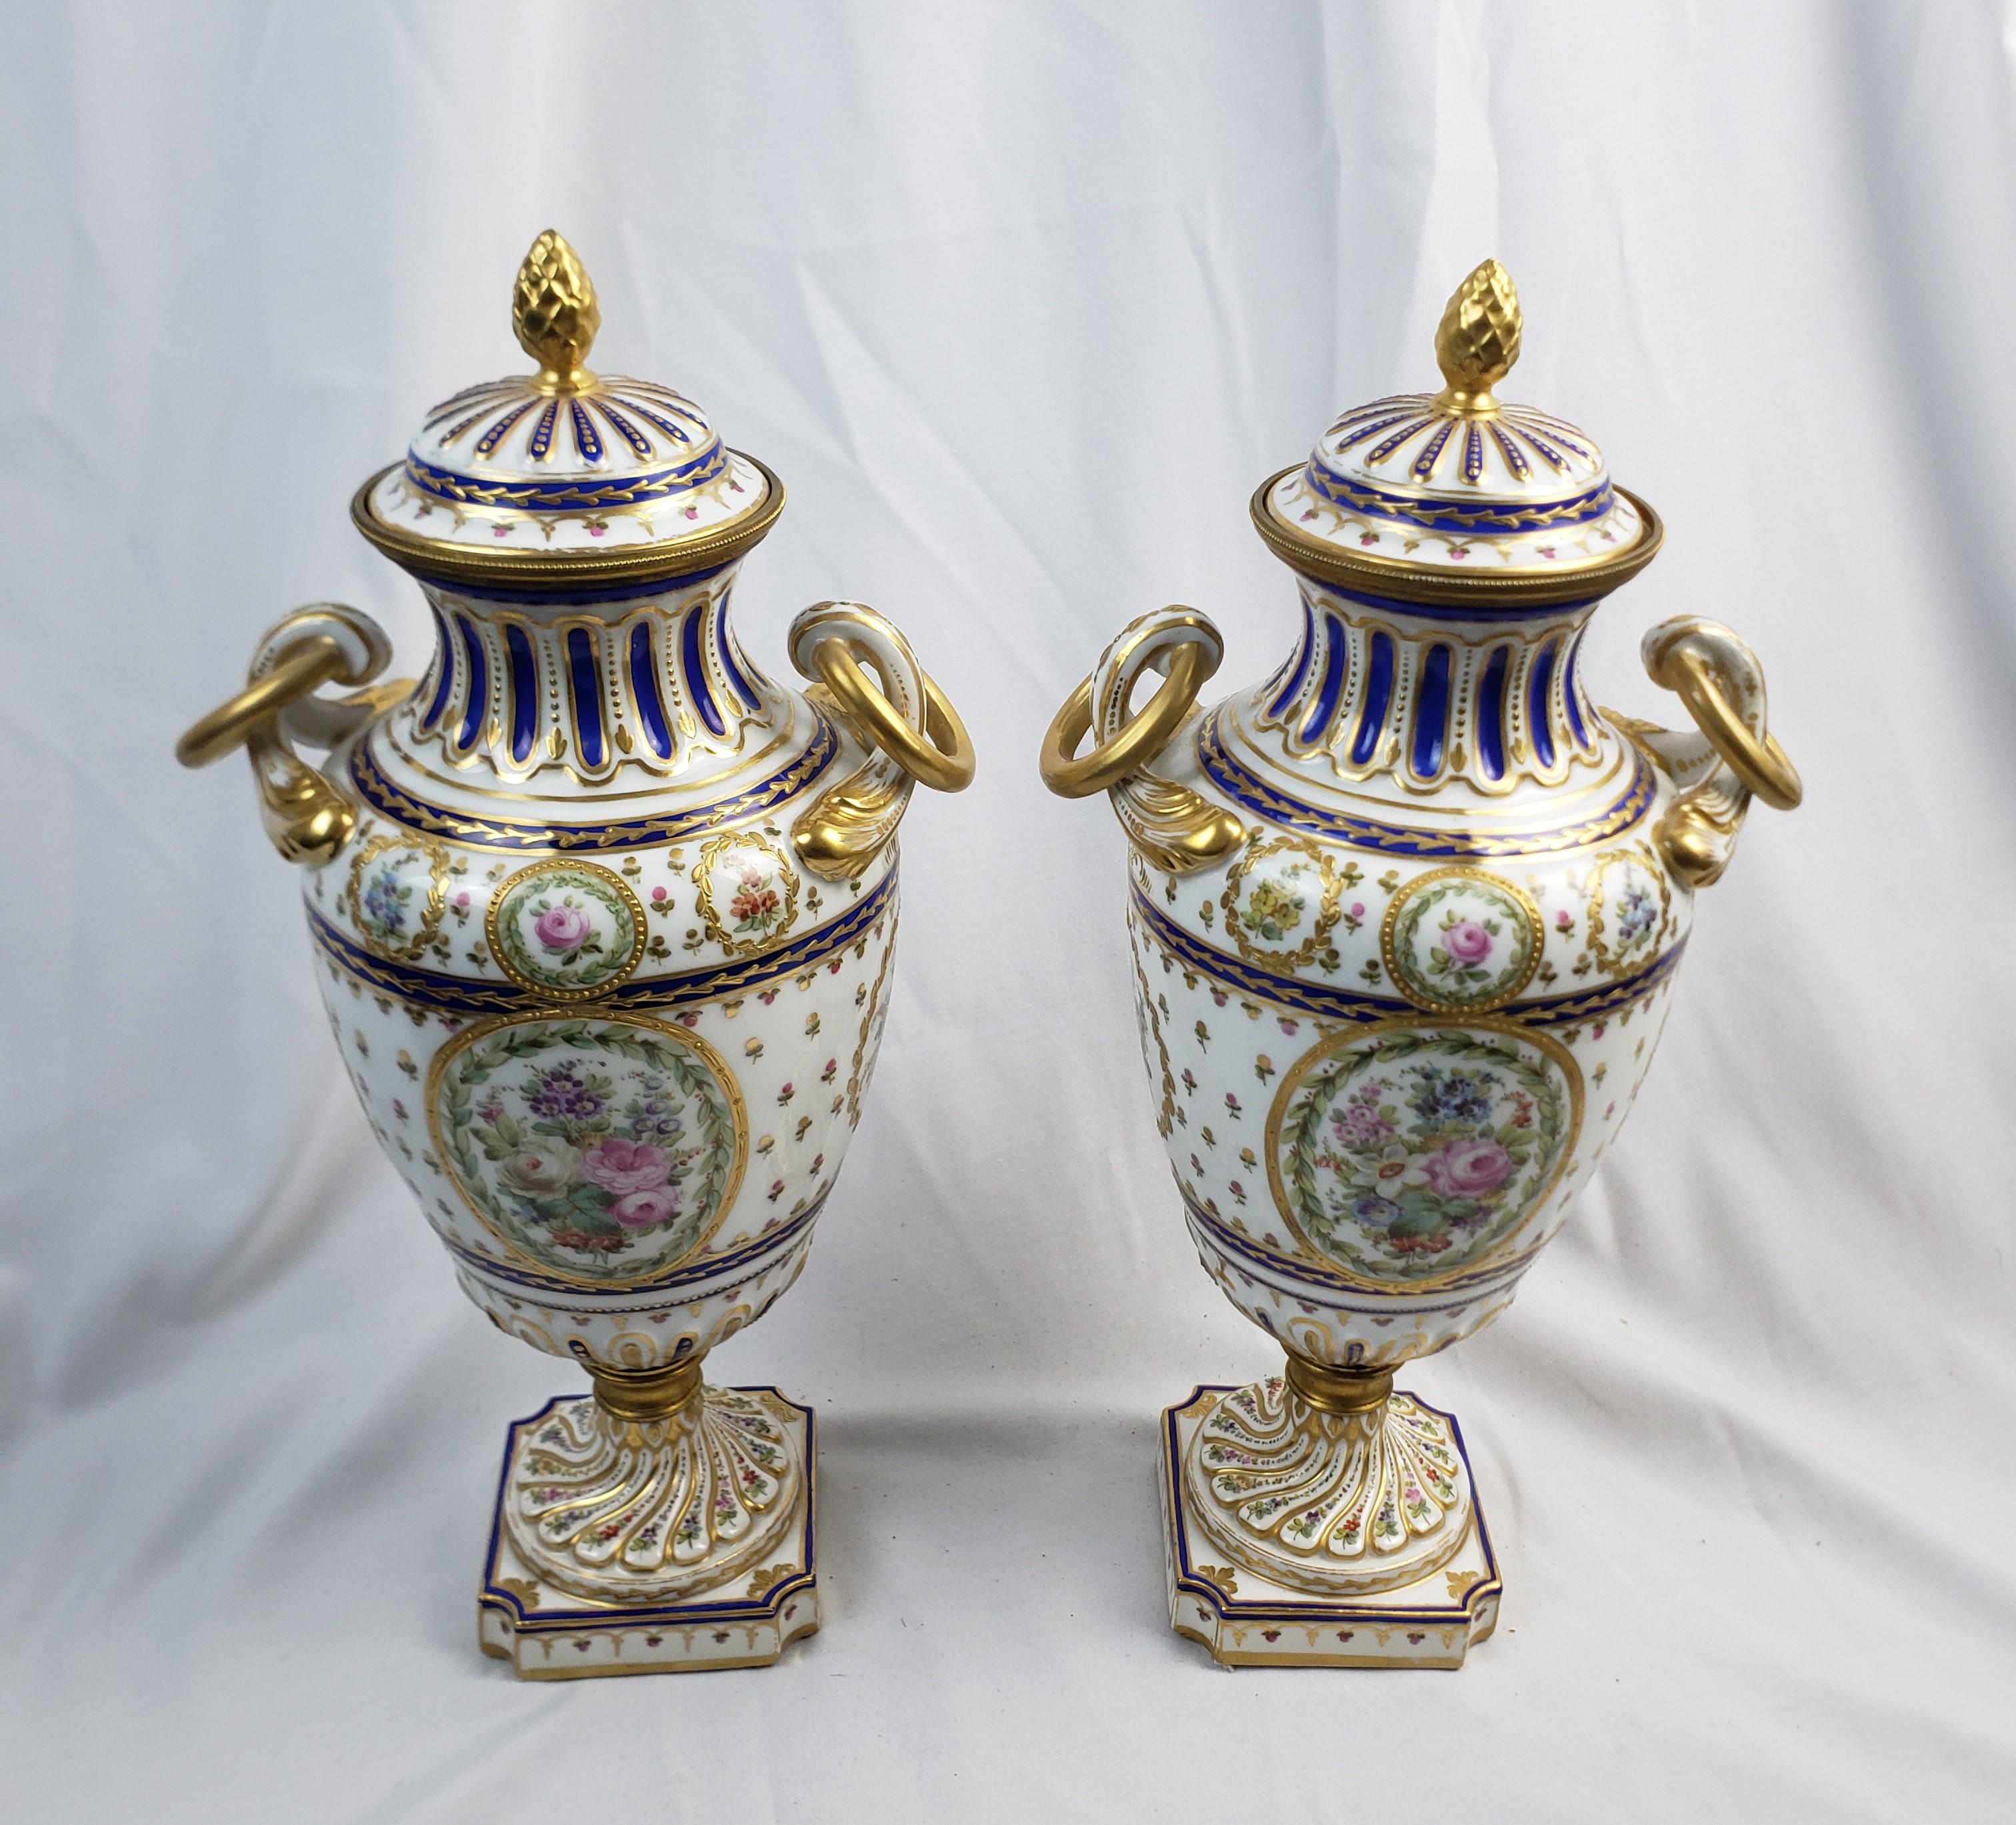 Pair of Antique Sevres Styled Covered Urns with Ornate Hand-Painted Decoration In Good Condition For Sale In Hamilton, Ontario